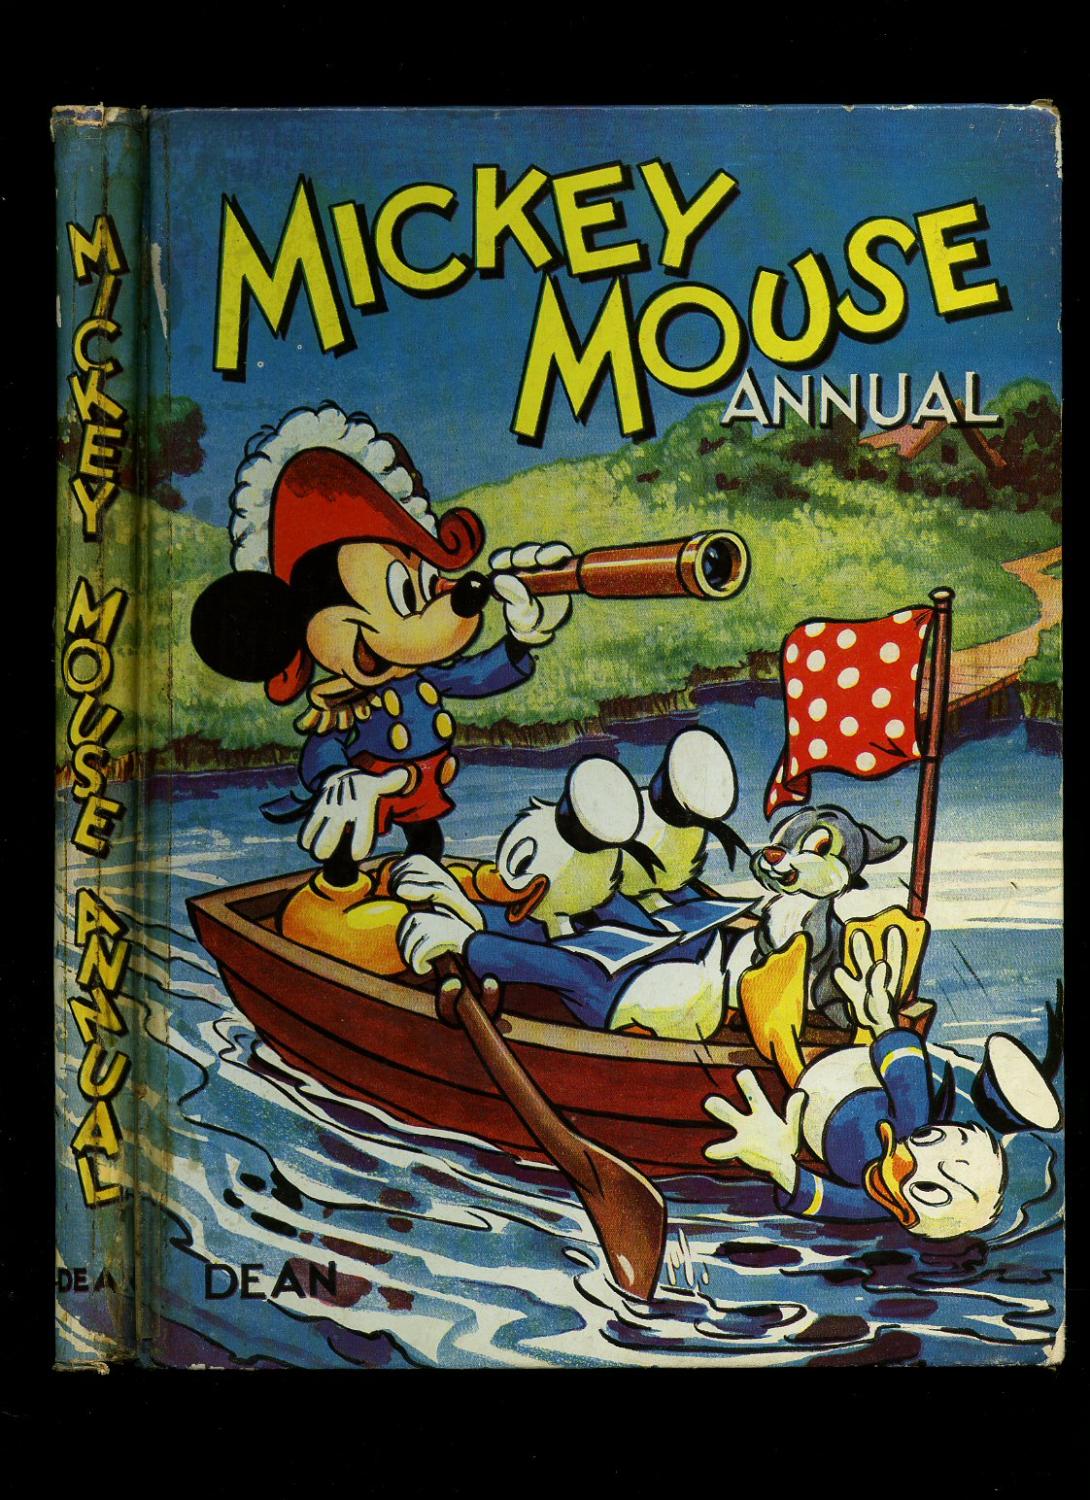 Original Special issue of Mickey Mouse from 1951 to choose from 